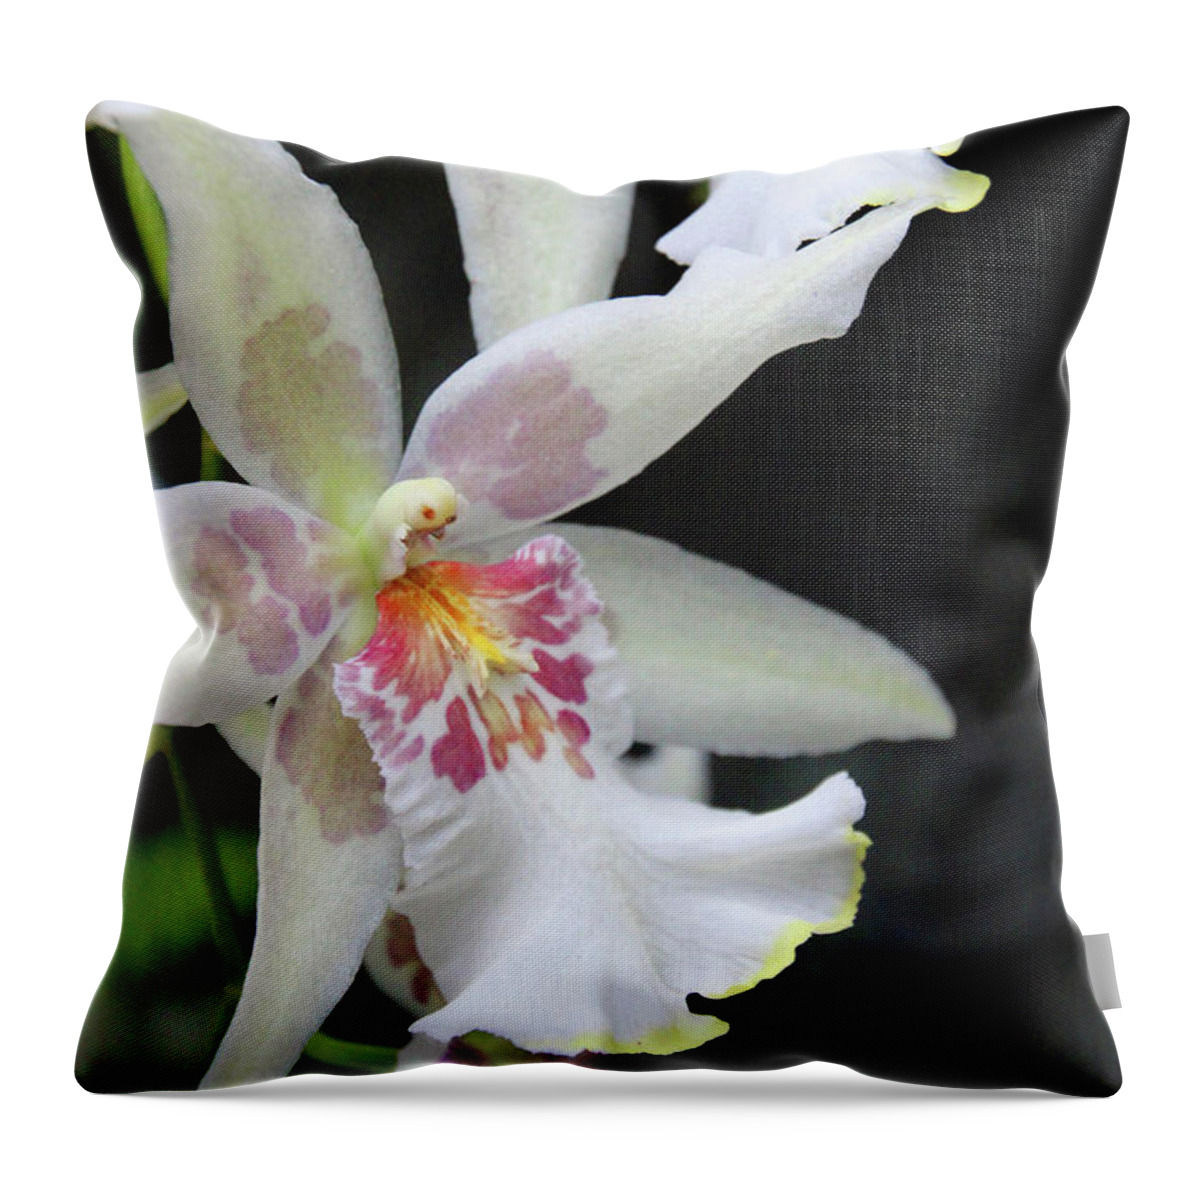 Orchids Throw Pillow featuring the photograph Orchids by Carolyn Stagger Cokley